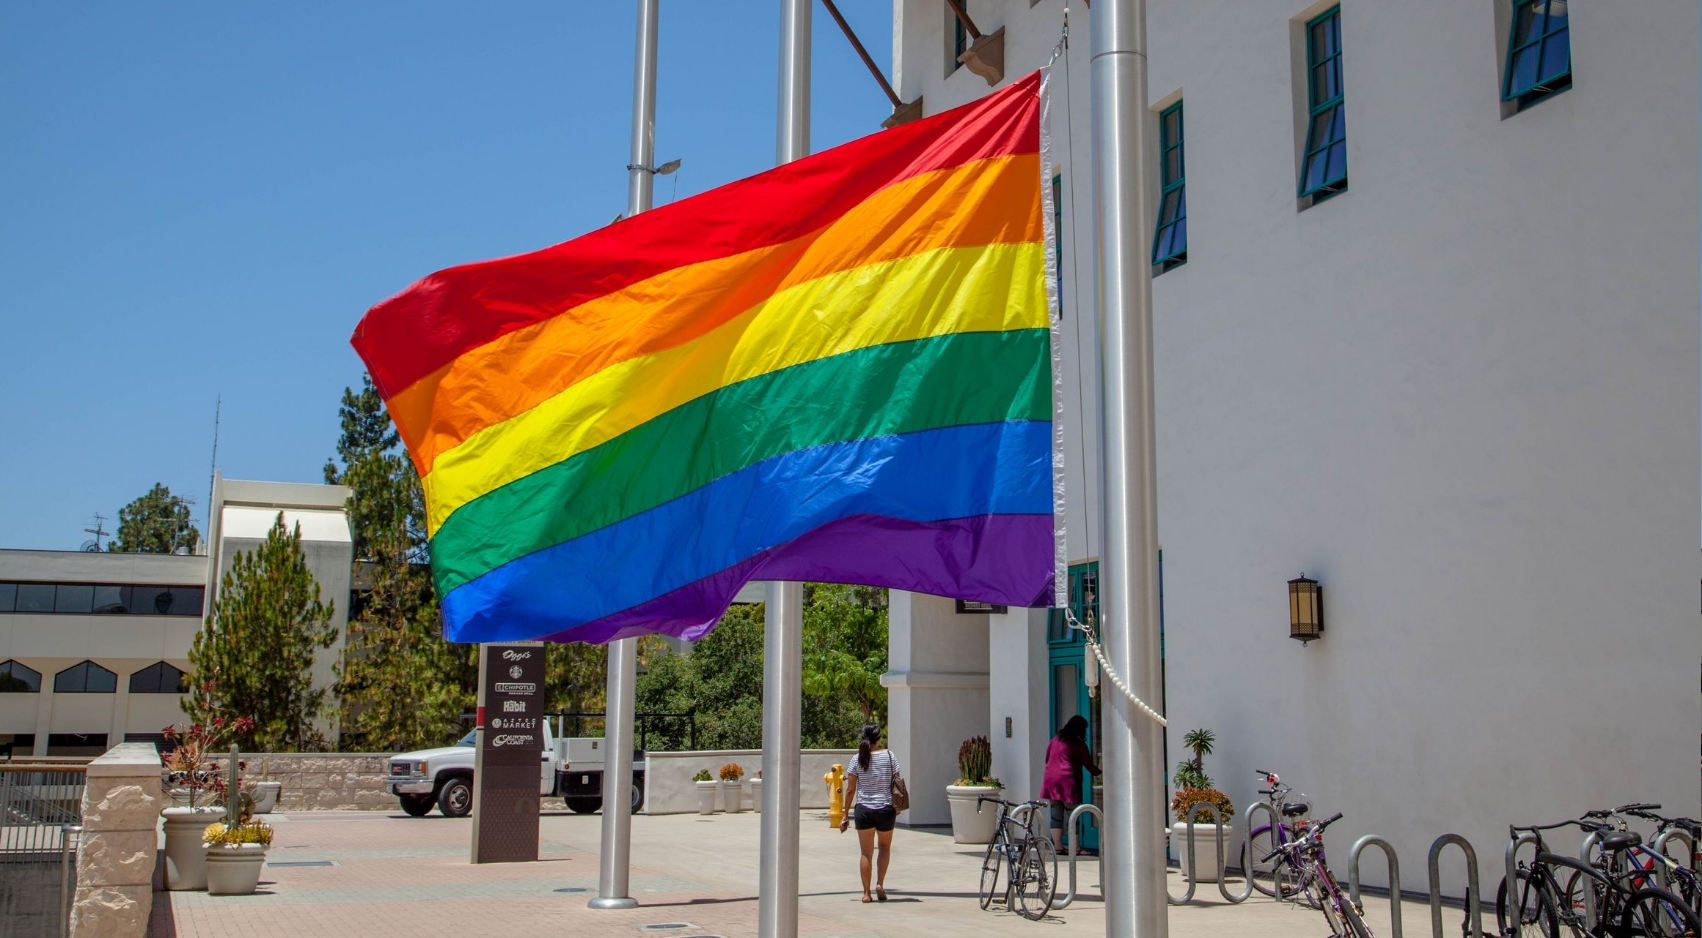 The flag symbolizes the diversity of sexual orientation and gender identities on campus.